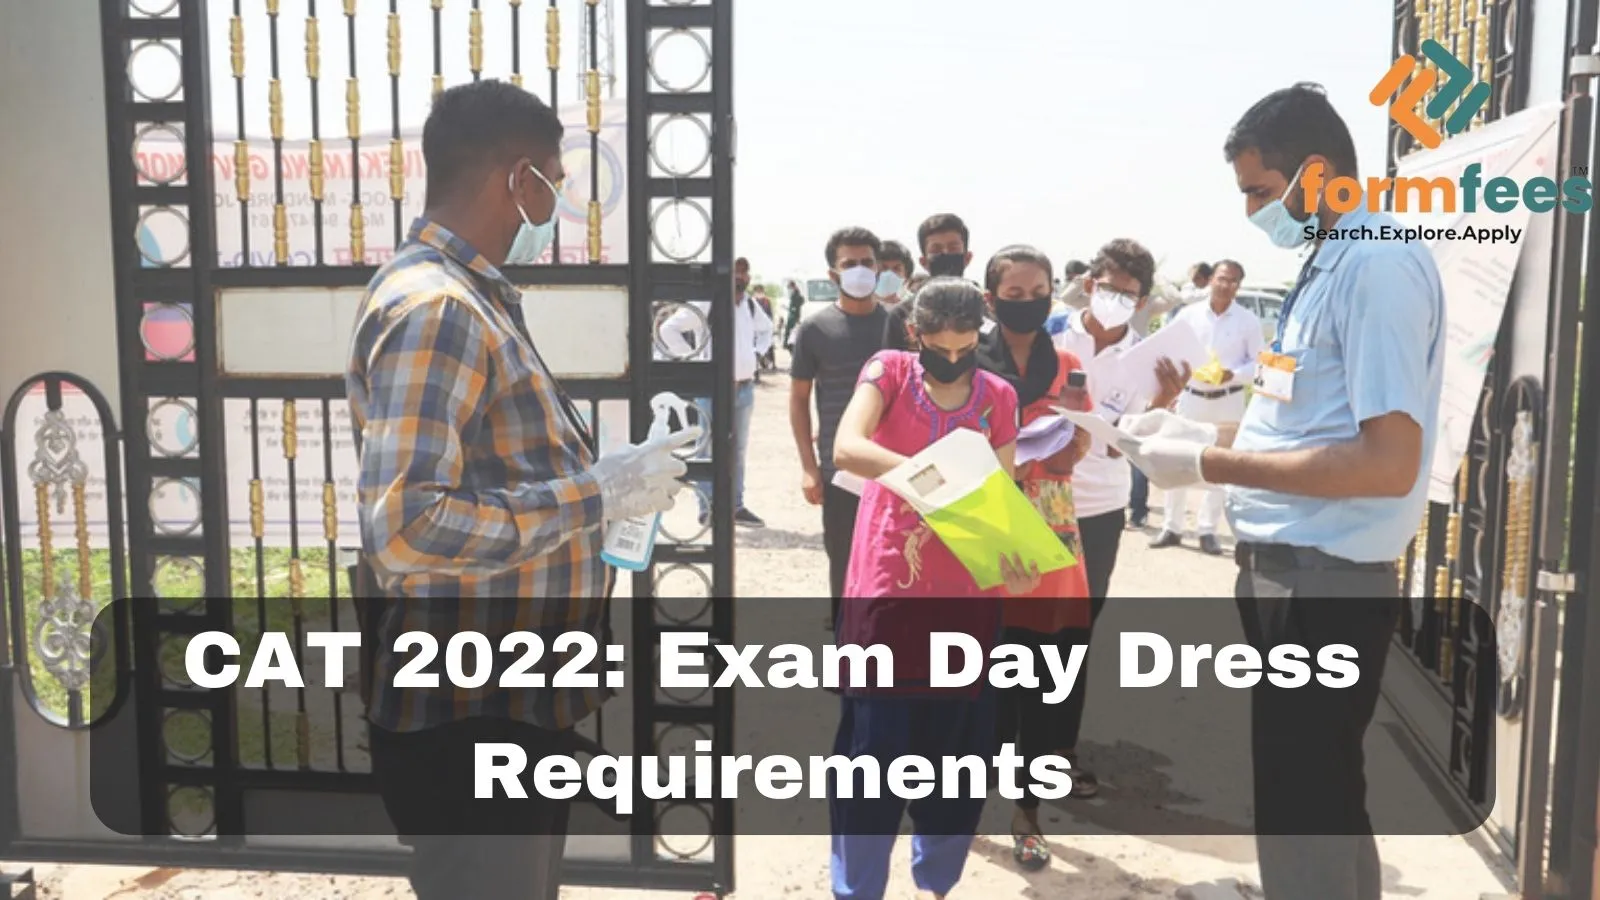 CAT 2022 Exam Day Dress Requirements